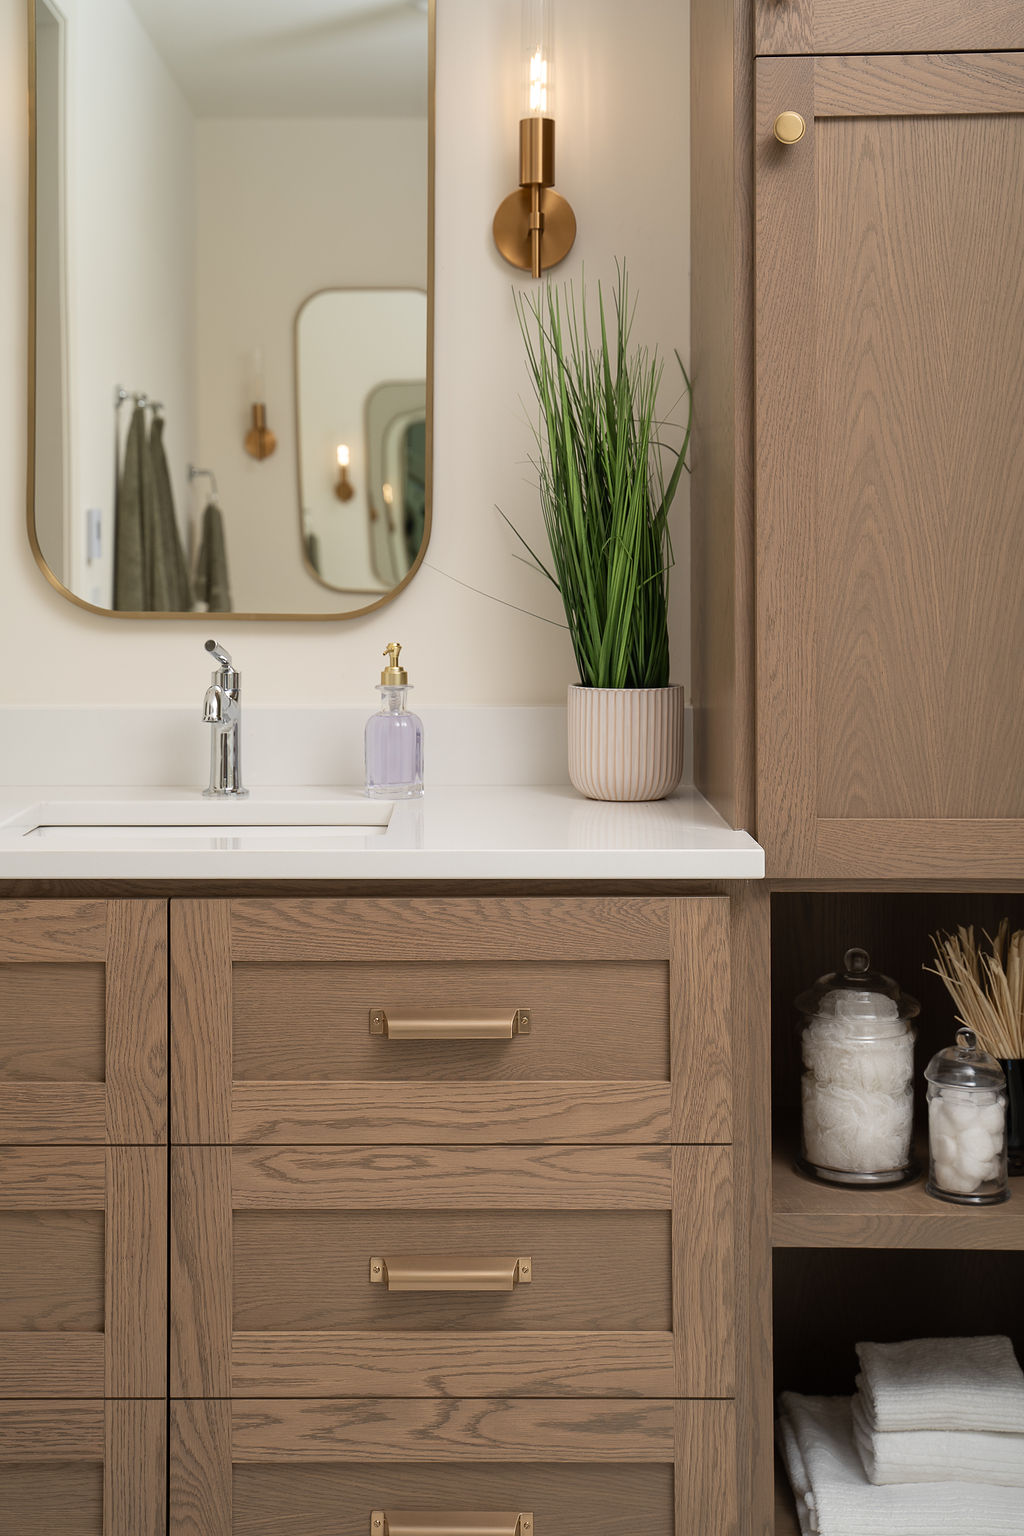 Master bathroom vanity with oak wood and gold hardware